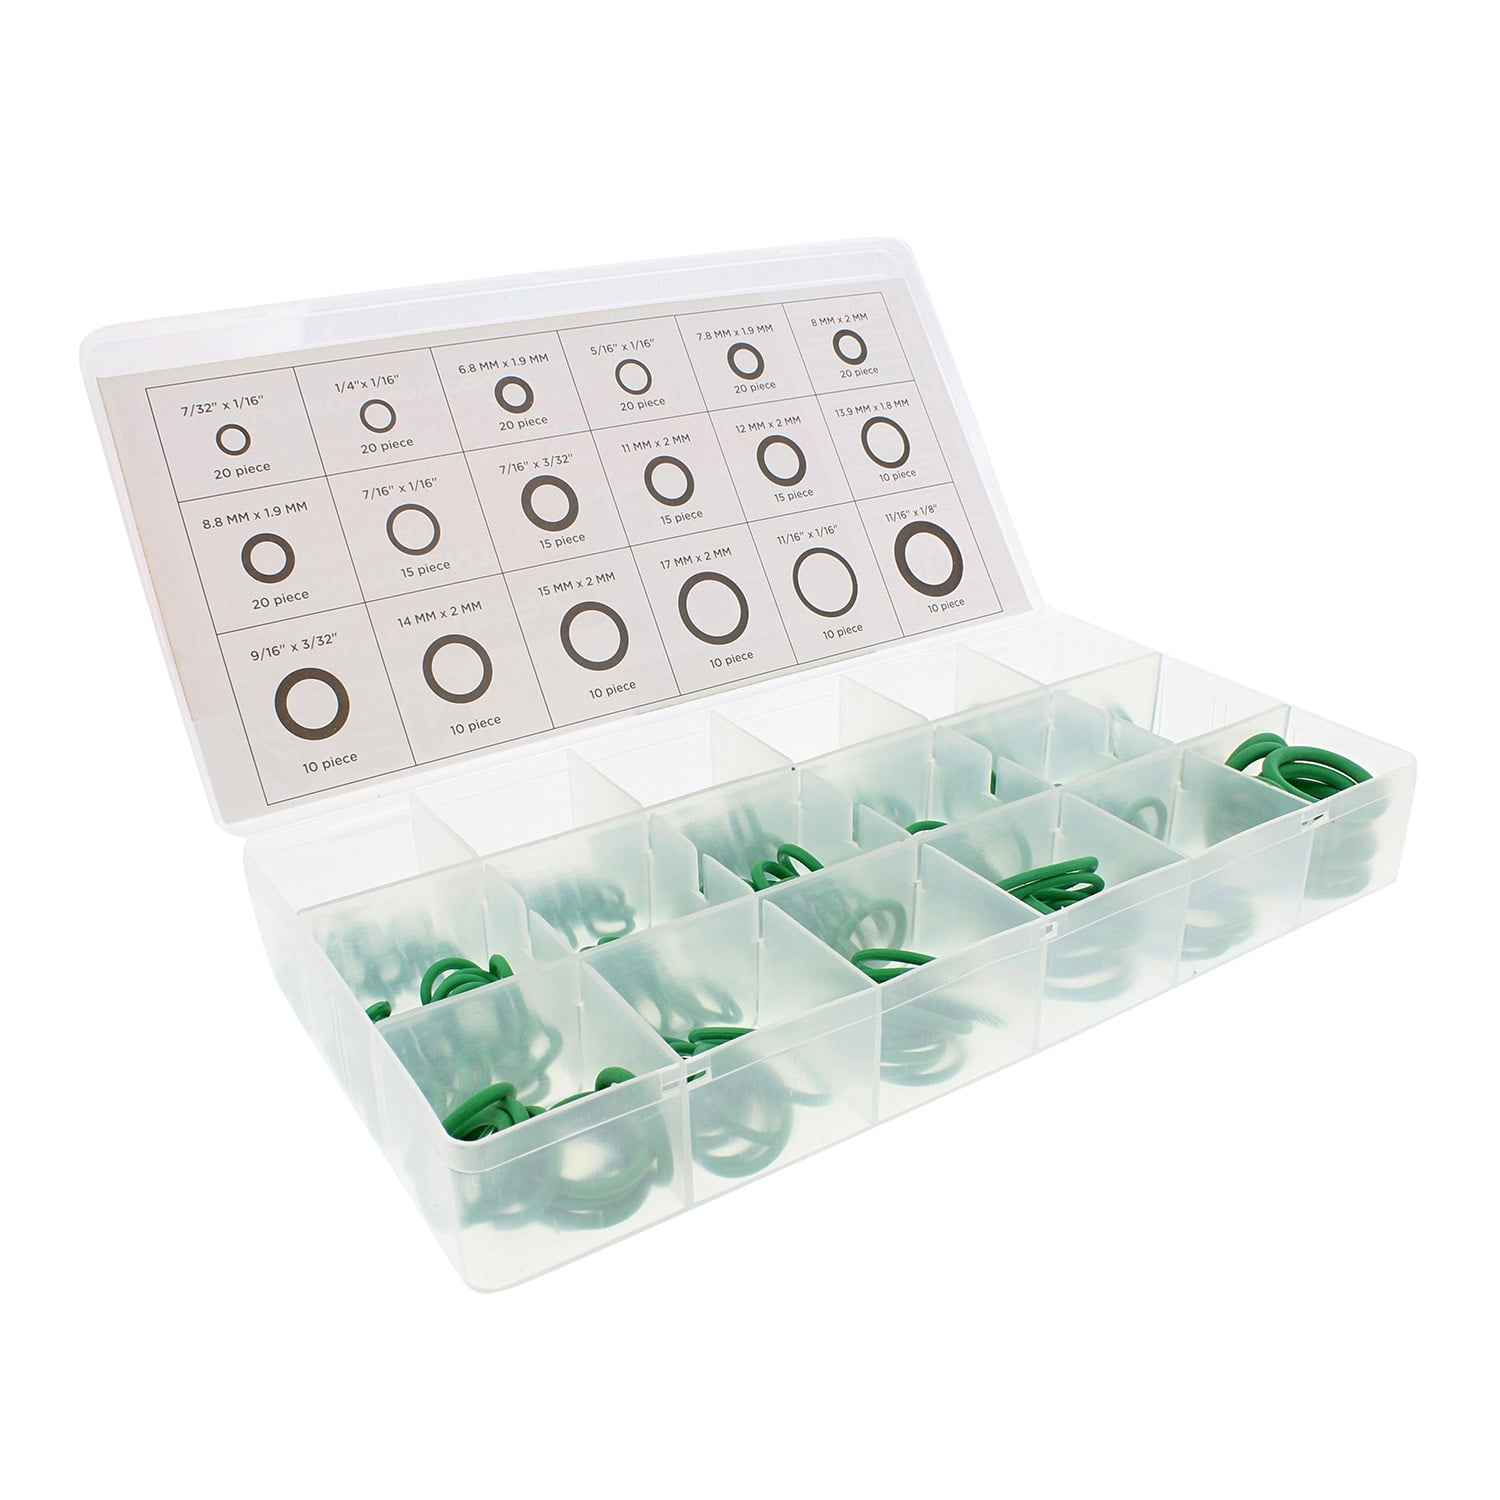 Metric O-ring set 419 piece  South East Clearance Centre